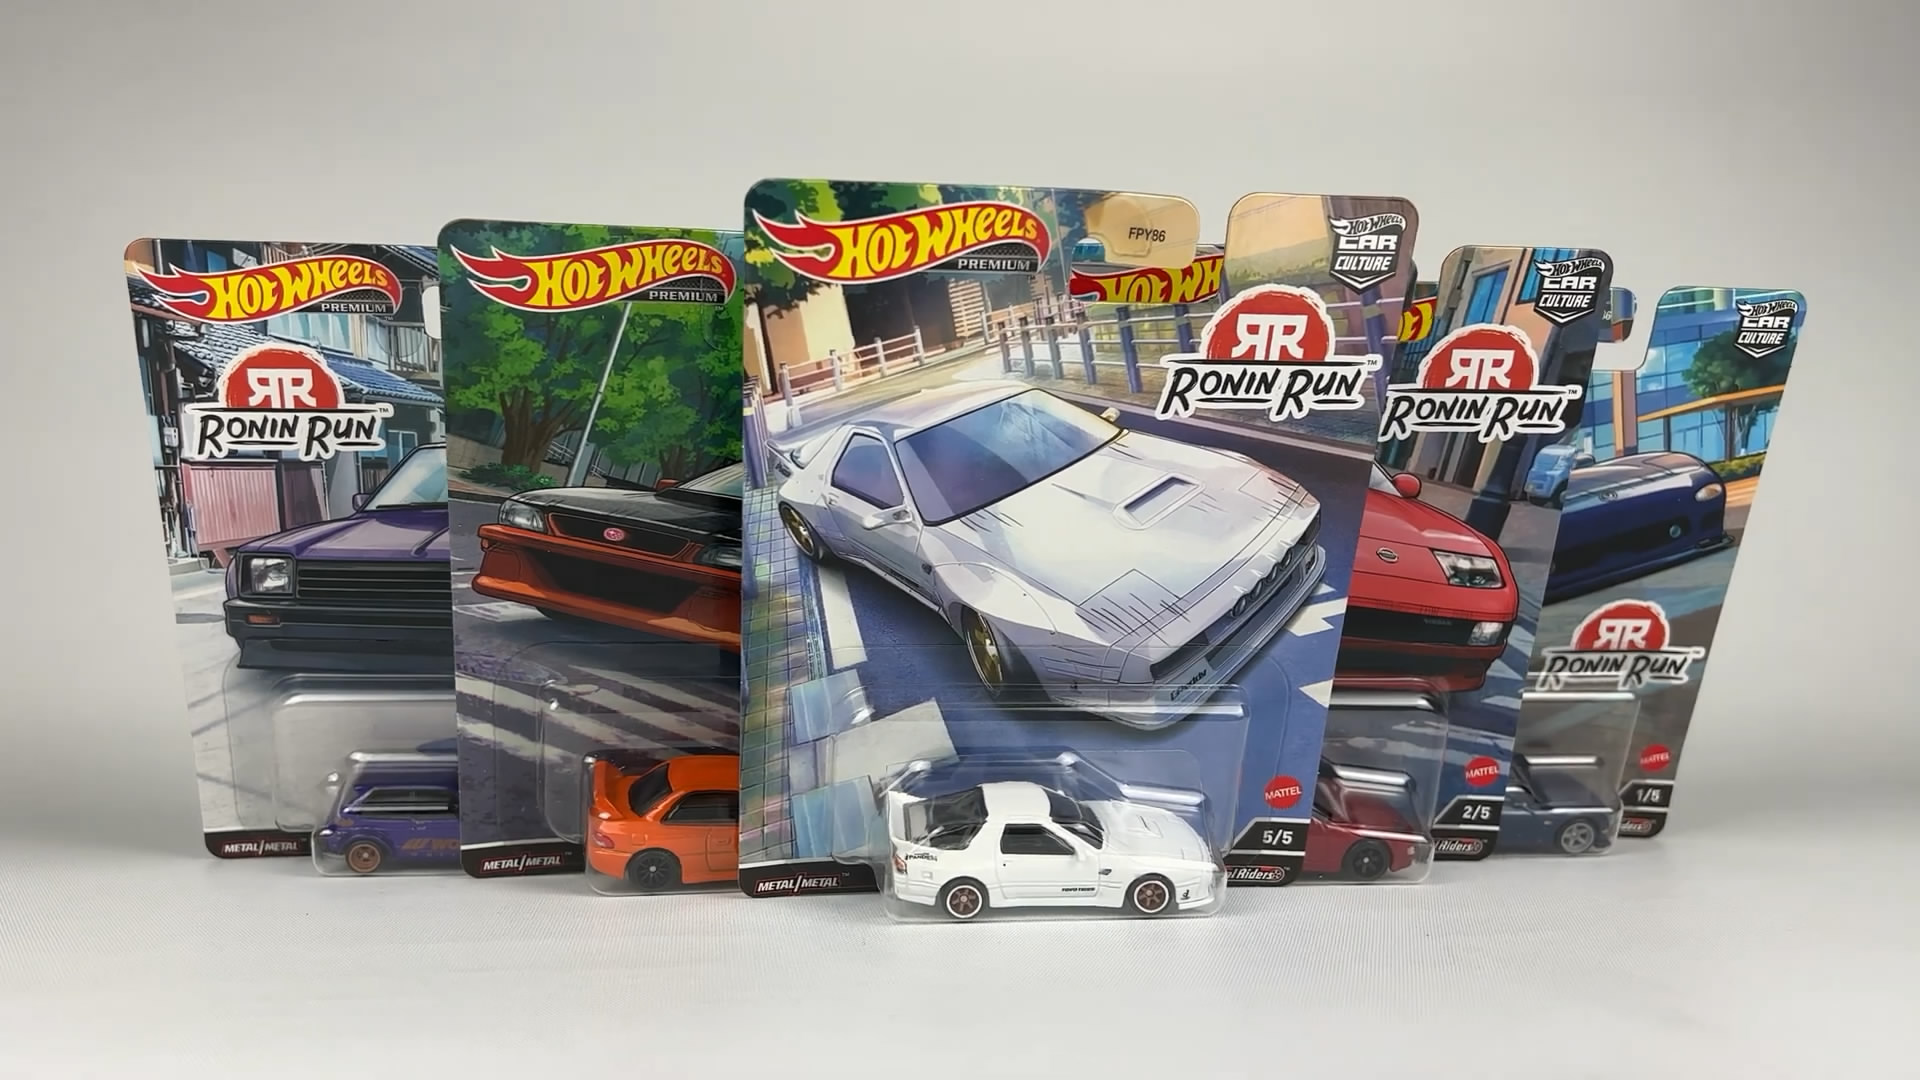 2022 Hot Wheels Car Culture - Ronin Run!  95 MAZDA RX7  95 MAZDA RX7  NISSAN <font color=red>30</font>0ZXTWIN TURBO  NISSAN <font color=red>30</font>0ZXTWIN TURBO  81 TOYOTA STARLET KP61  81 TOYOTA STARLE